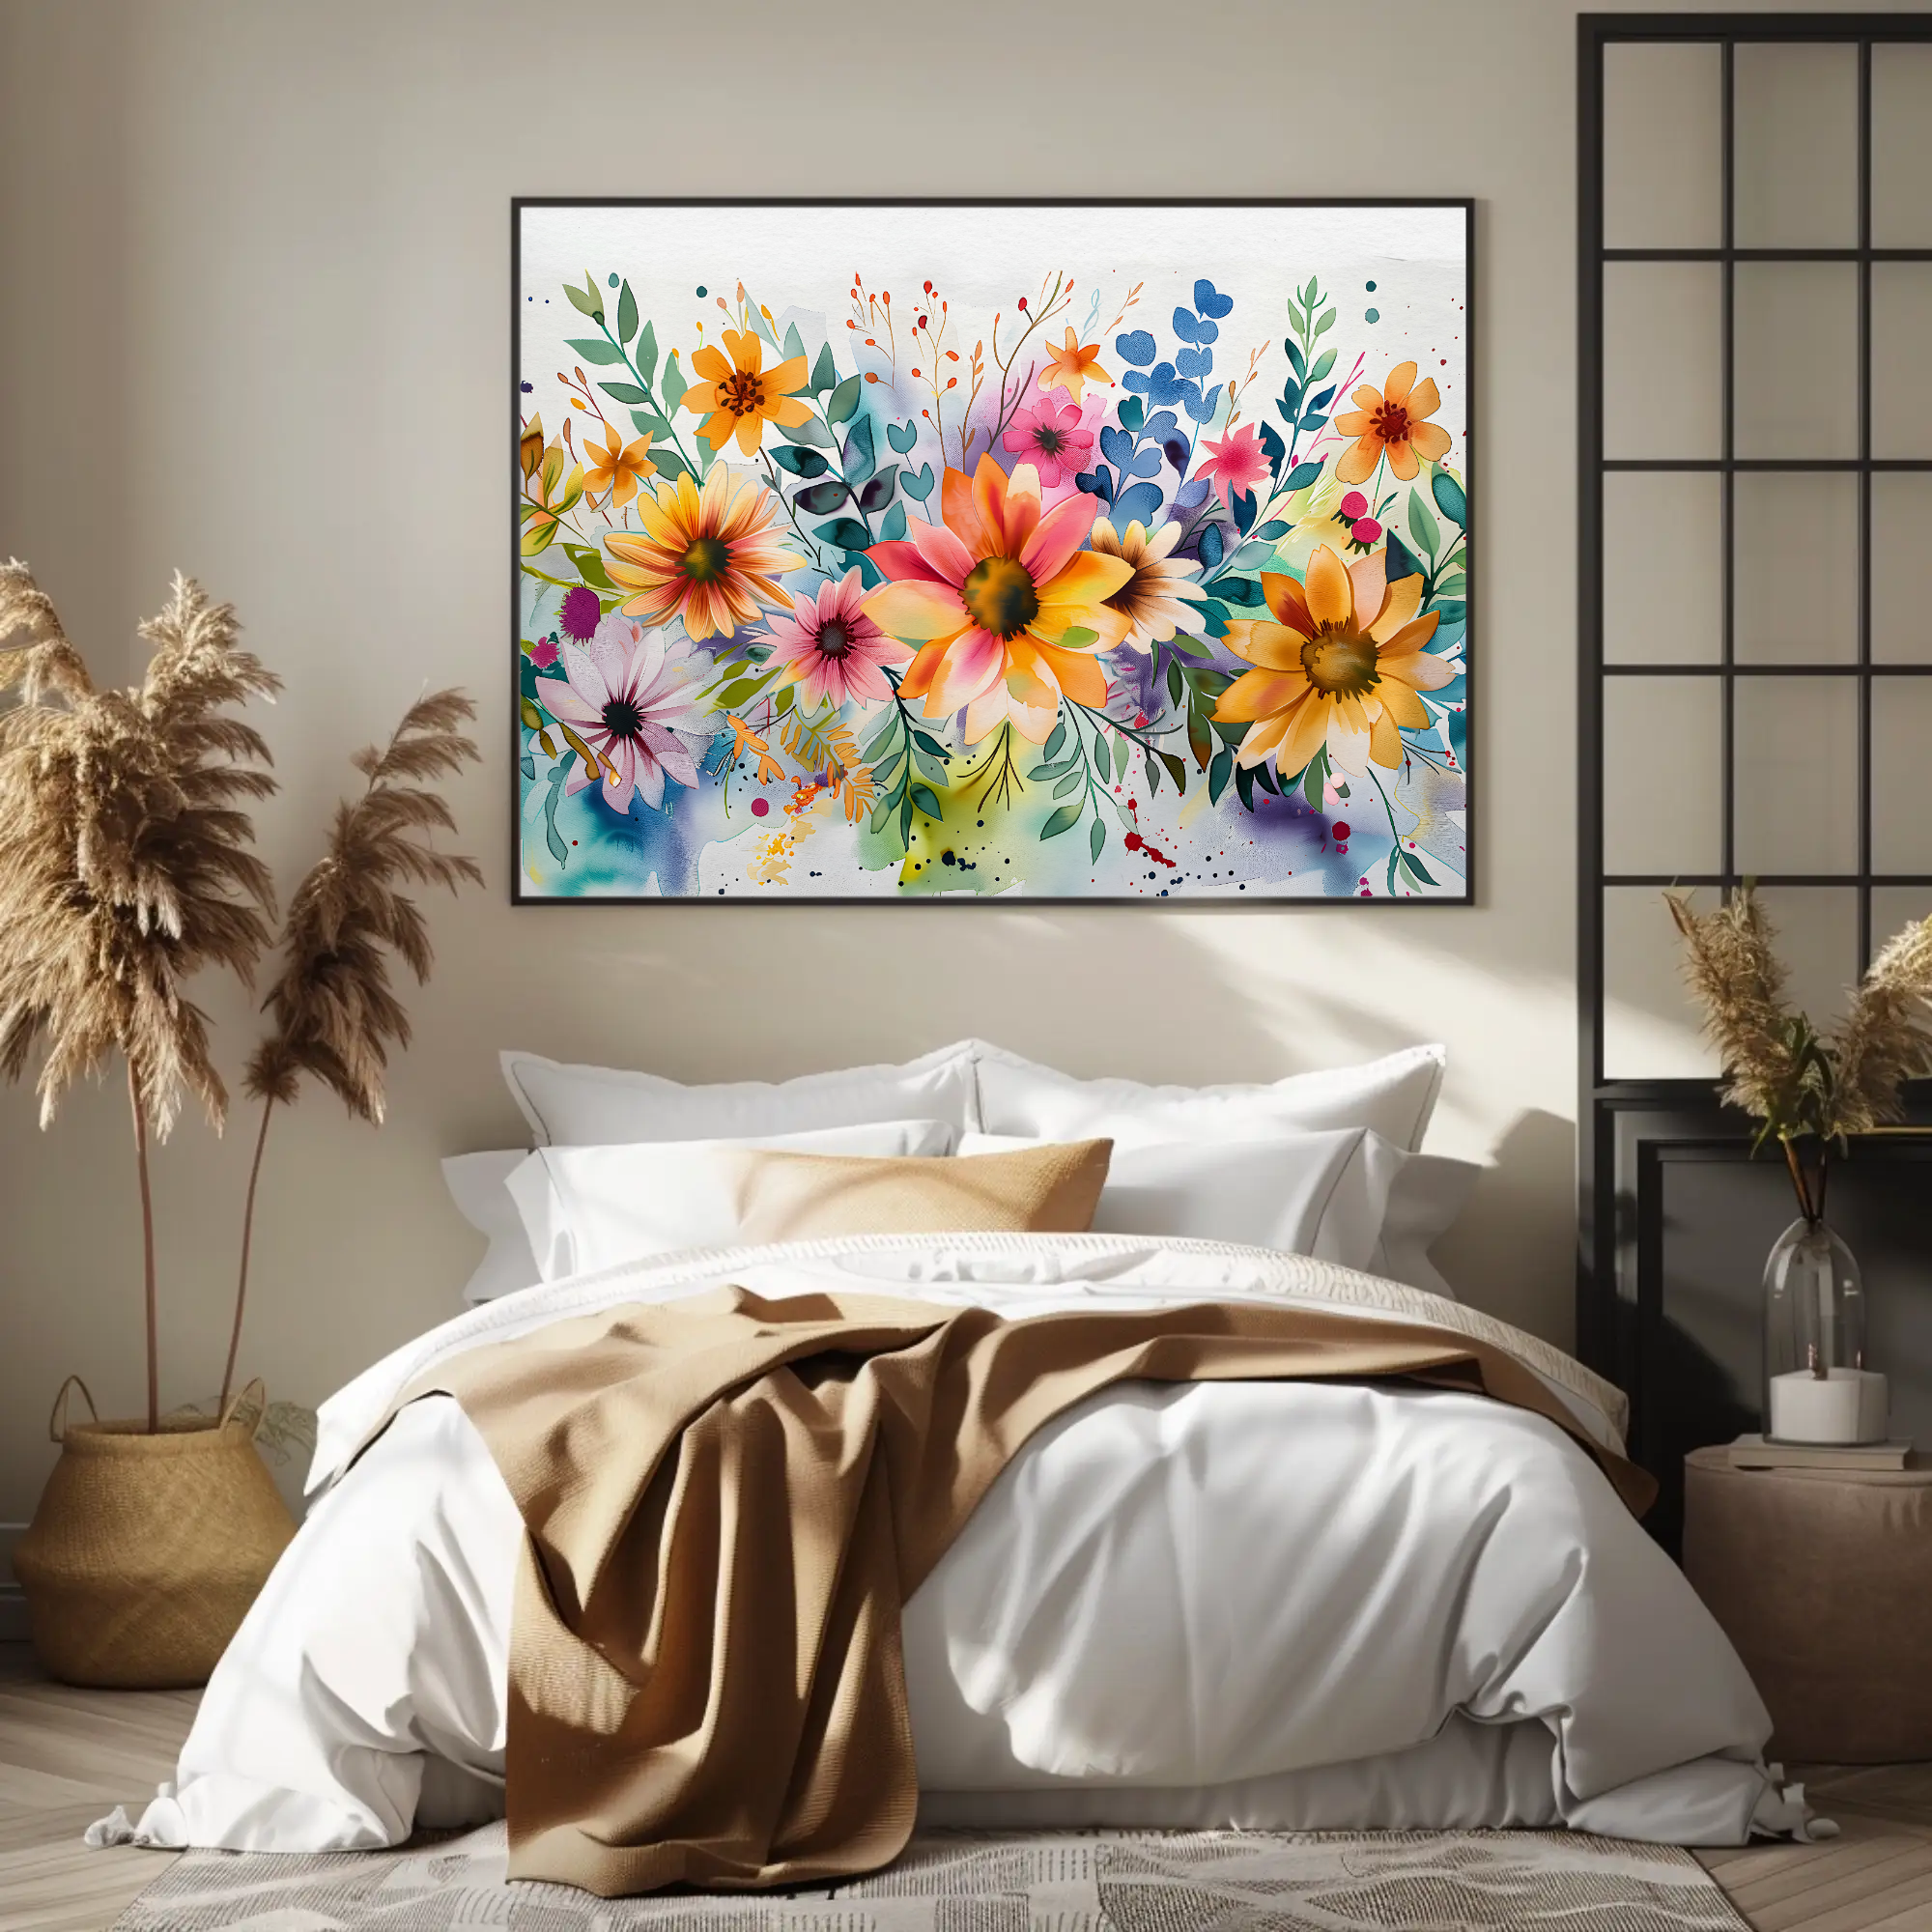 Blooming Beauty Wall Art: Watercolor Floral